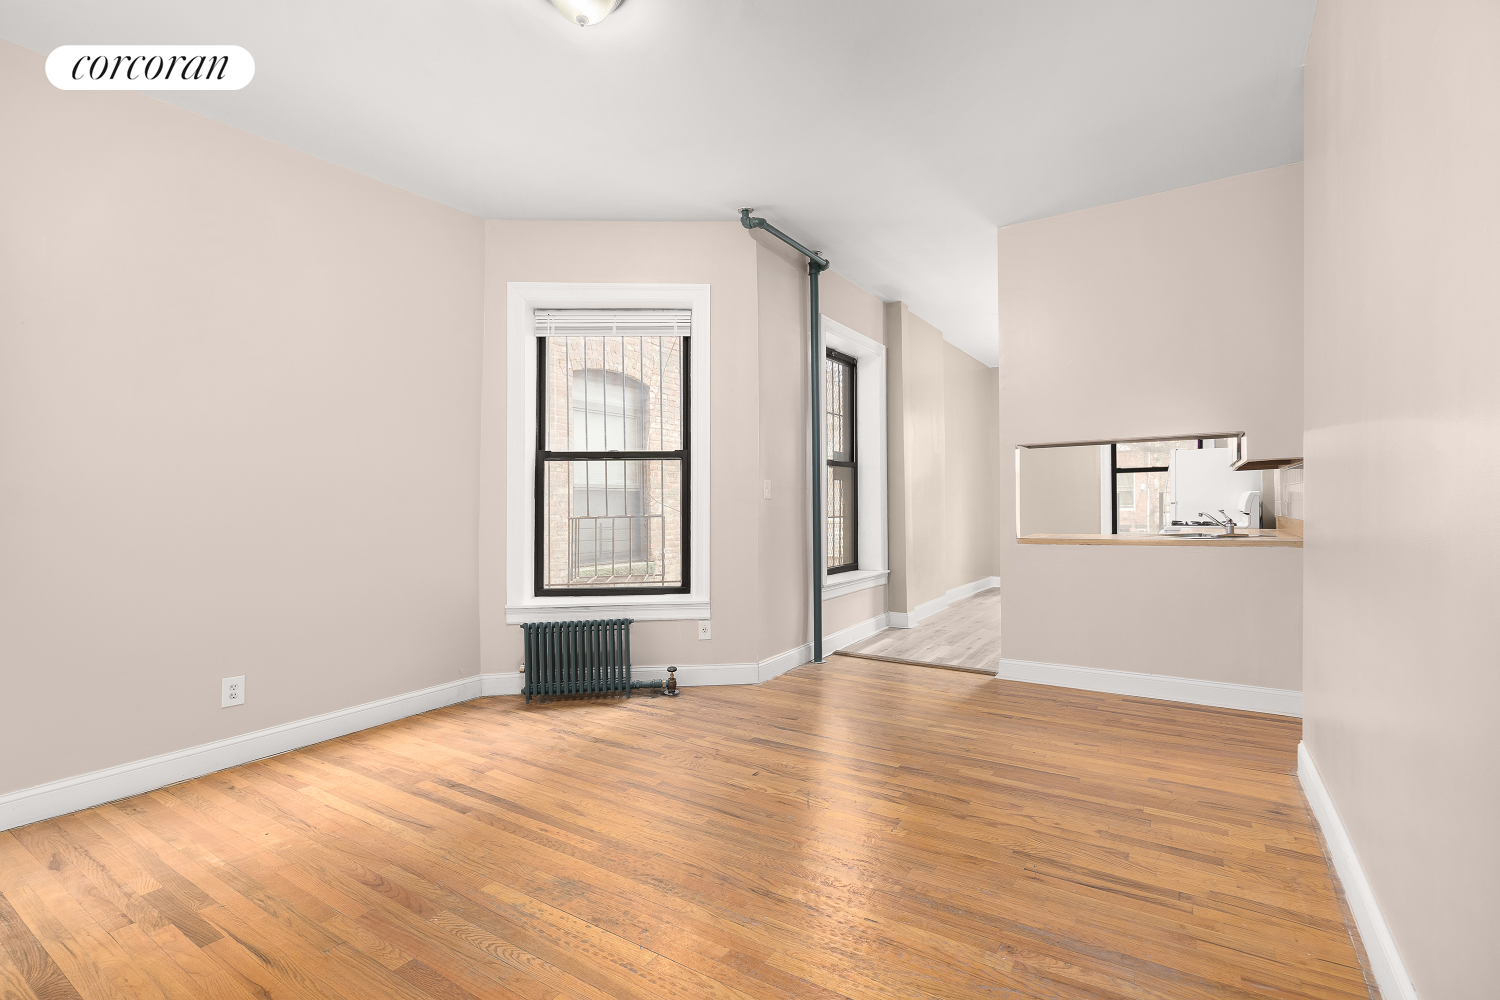 571 Sterling Place 1L, Crown Heights, Brooklyn, New York - 2 Bedrooms  
1 Bathrooms  
4 Rooms - 